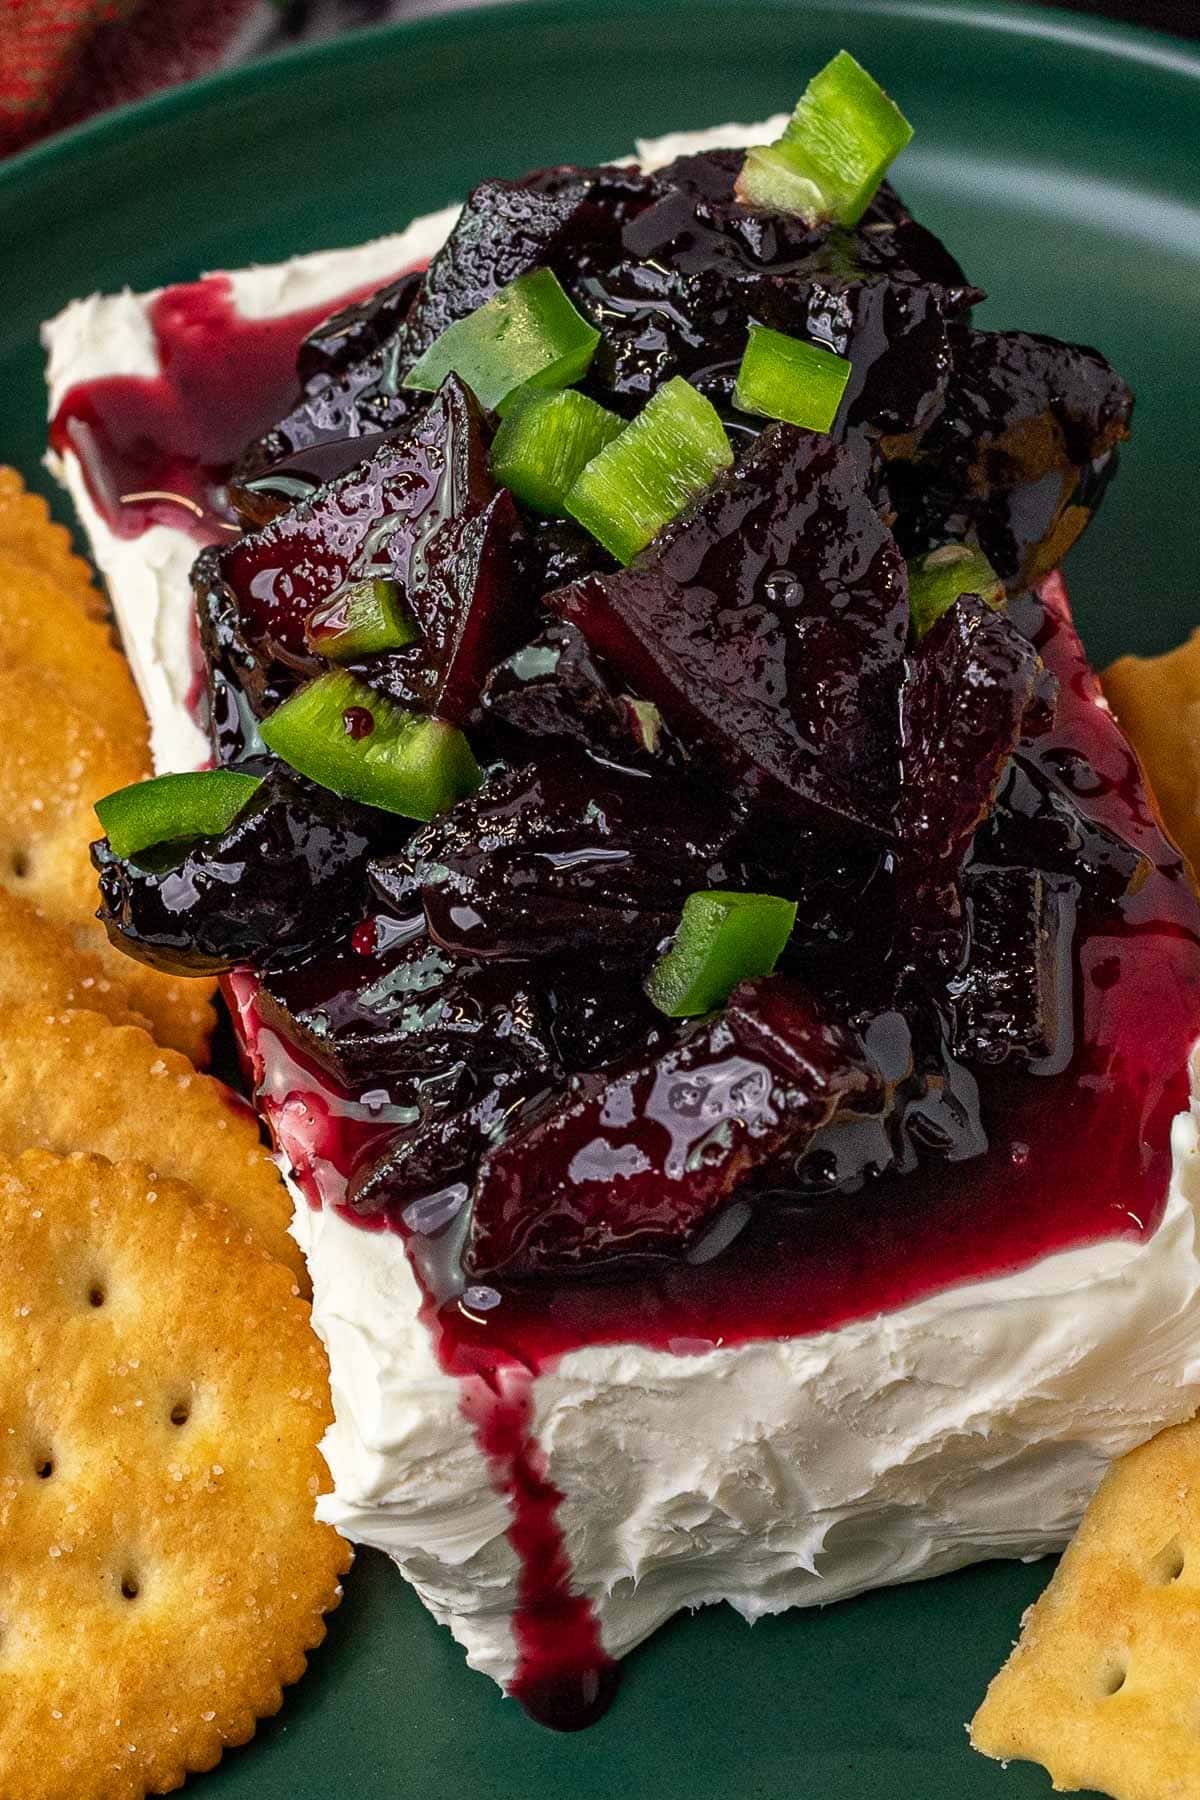 Cherry Jalapeno Jam prepared and served on cream cheese with crackers